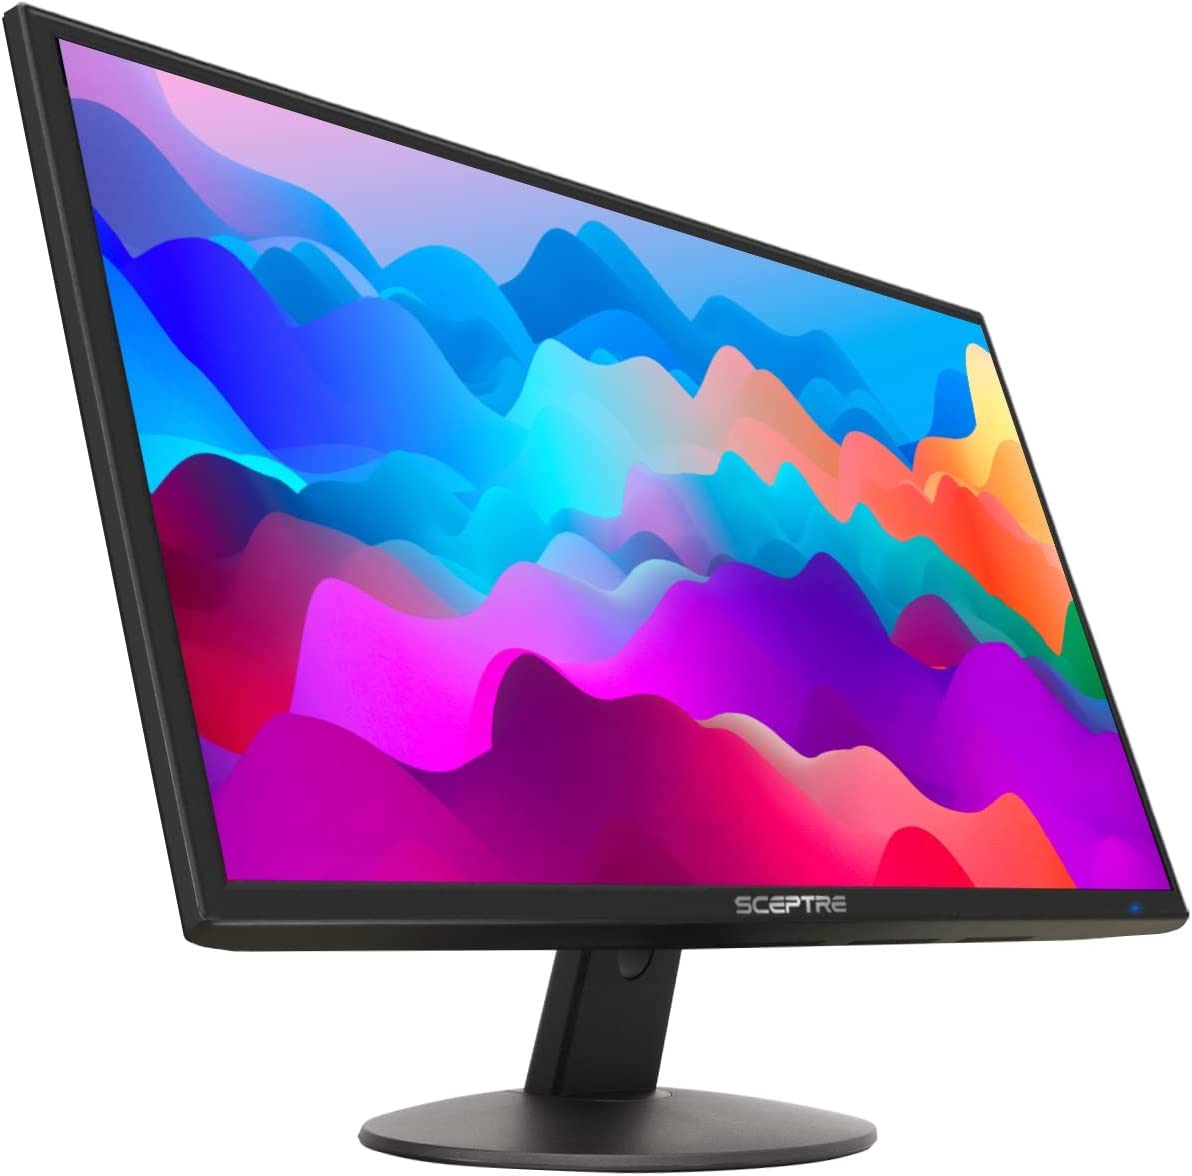 inexpensive monitor review